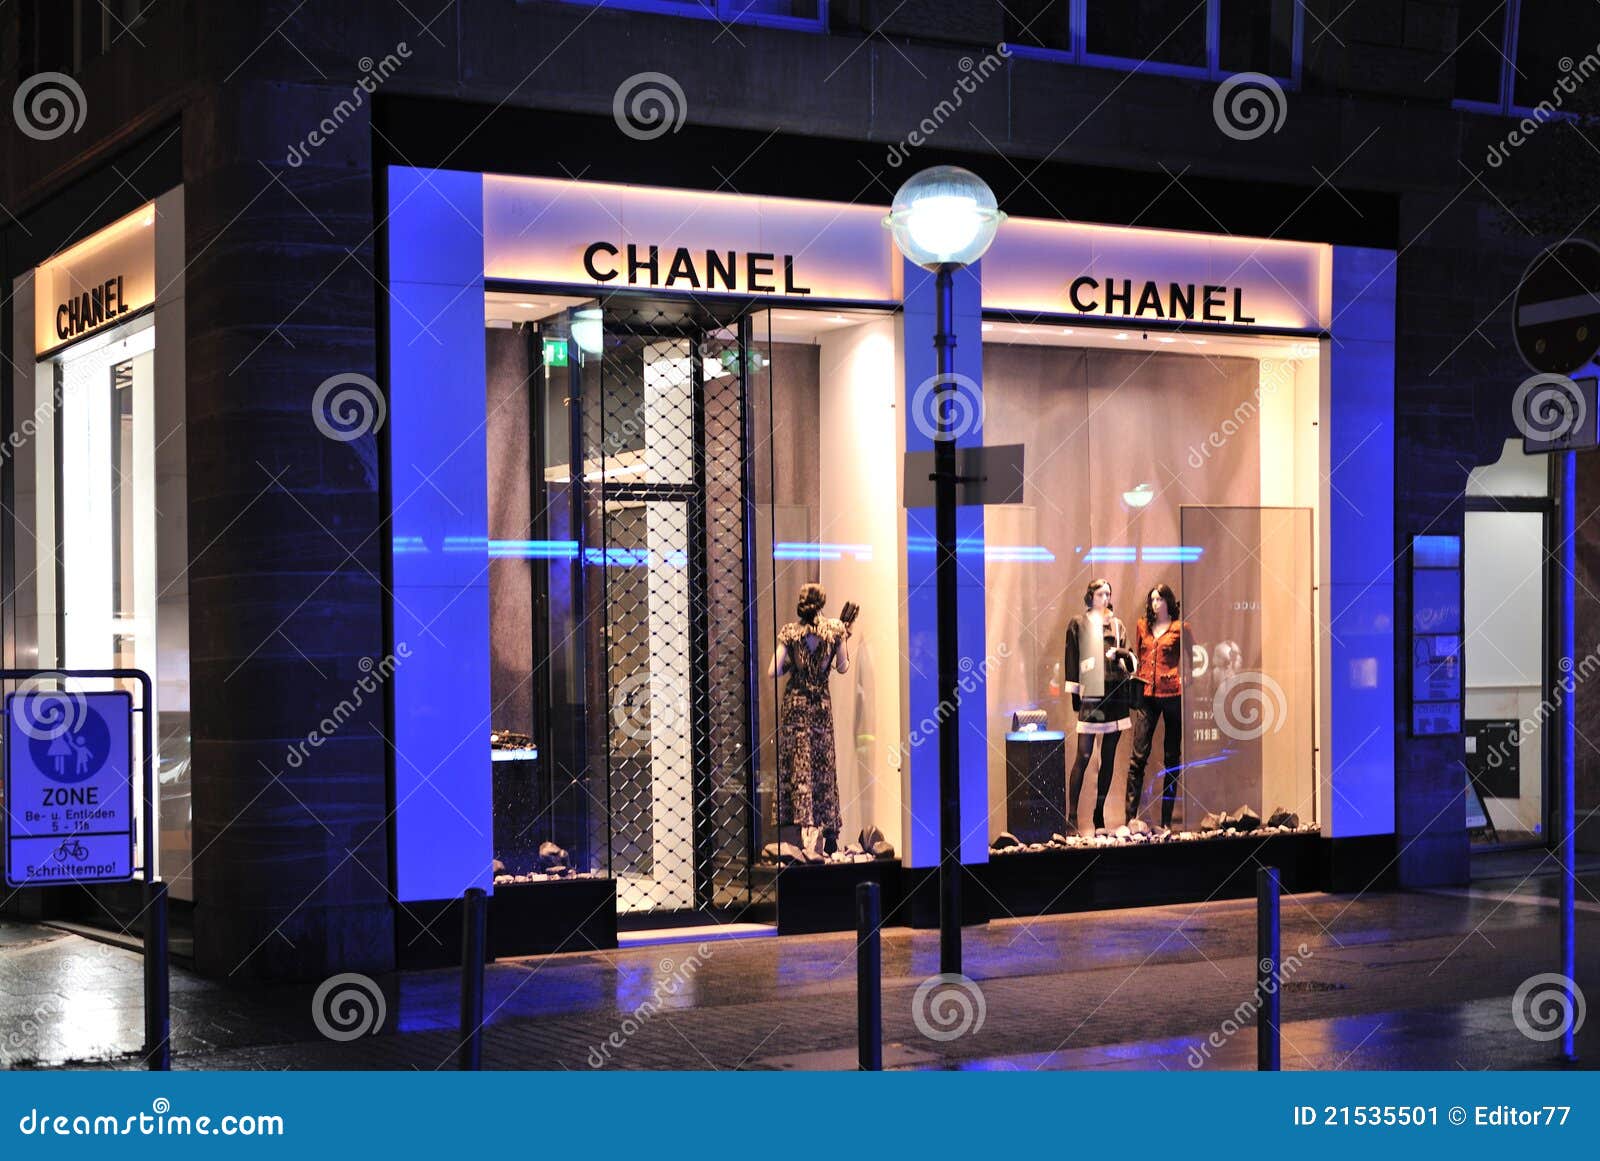 Coco chanel Stock Photos, Royalty Free Coco chanel Images